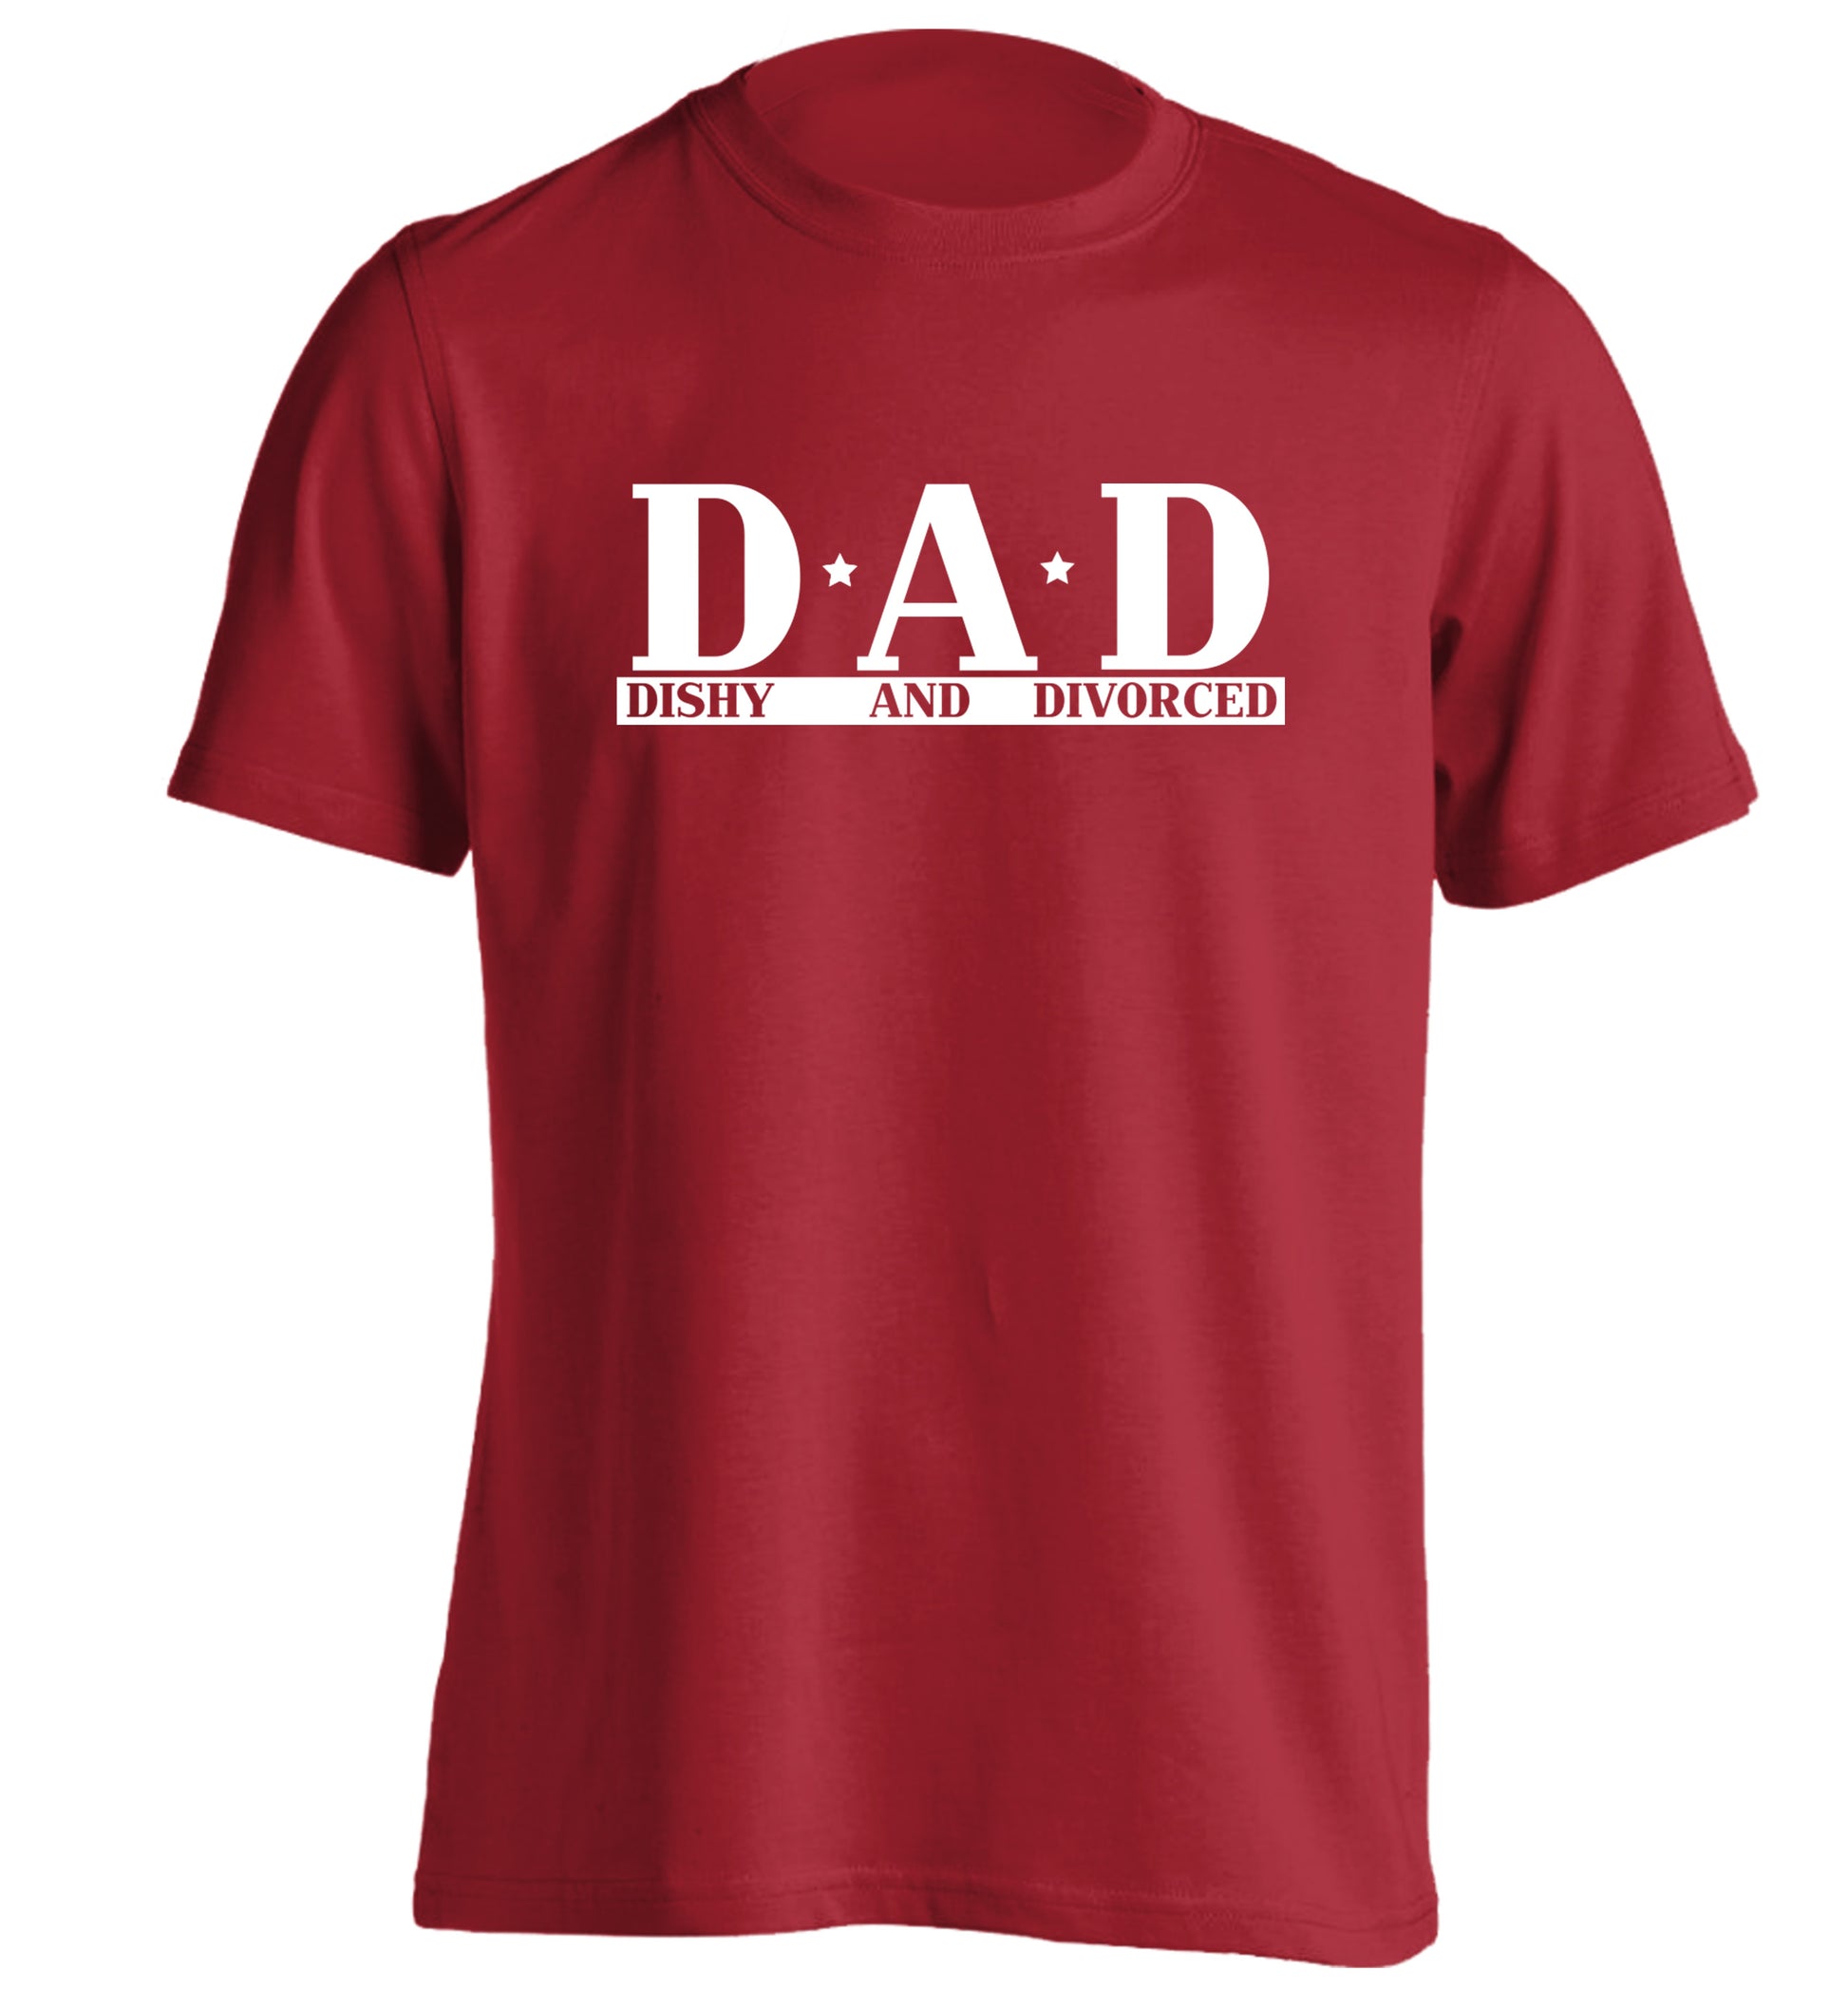 D.A.D meaning Dishy and Divorced adults unisex red Tshirt 2XL